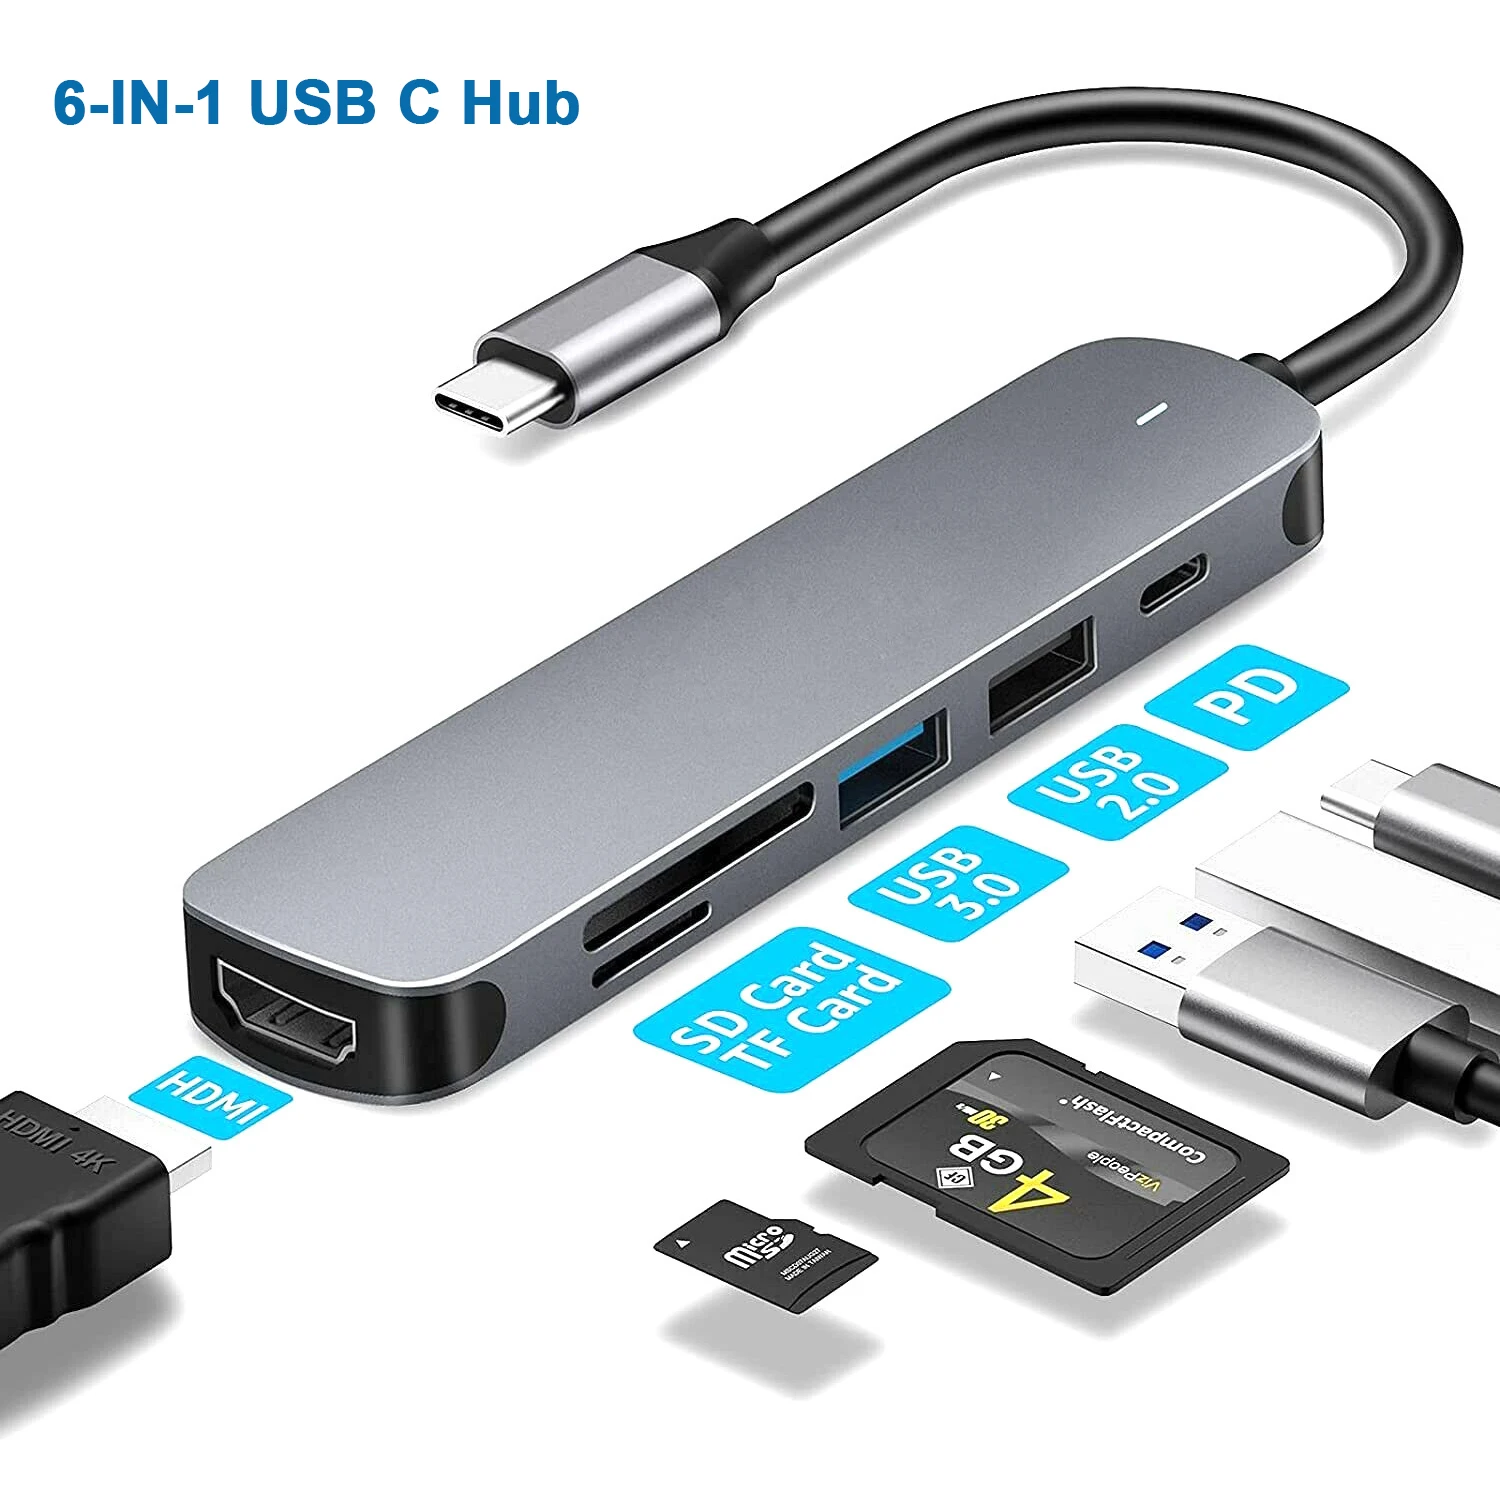 USB C Hub for IPad MacBook Air Pro Adapter 100W PD Dongle USB C To HDMI with USB 3.0 SD/TF Card Reader Thunderbolt 3 Type C Hub enlarge